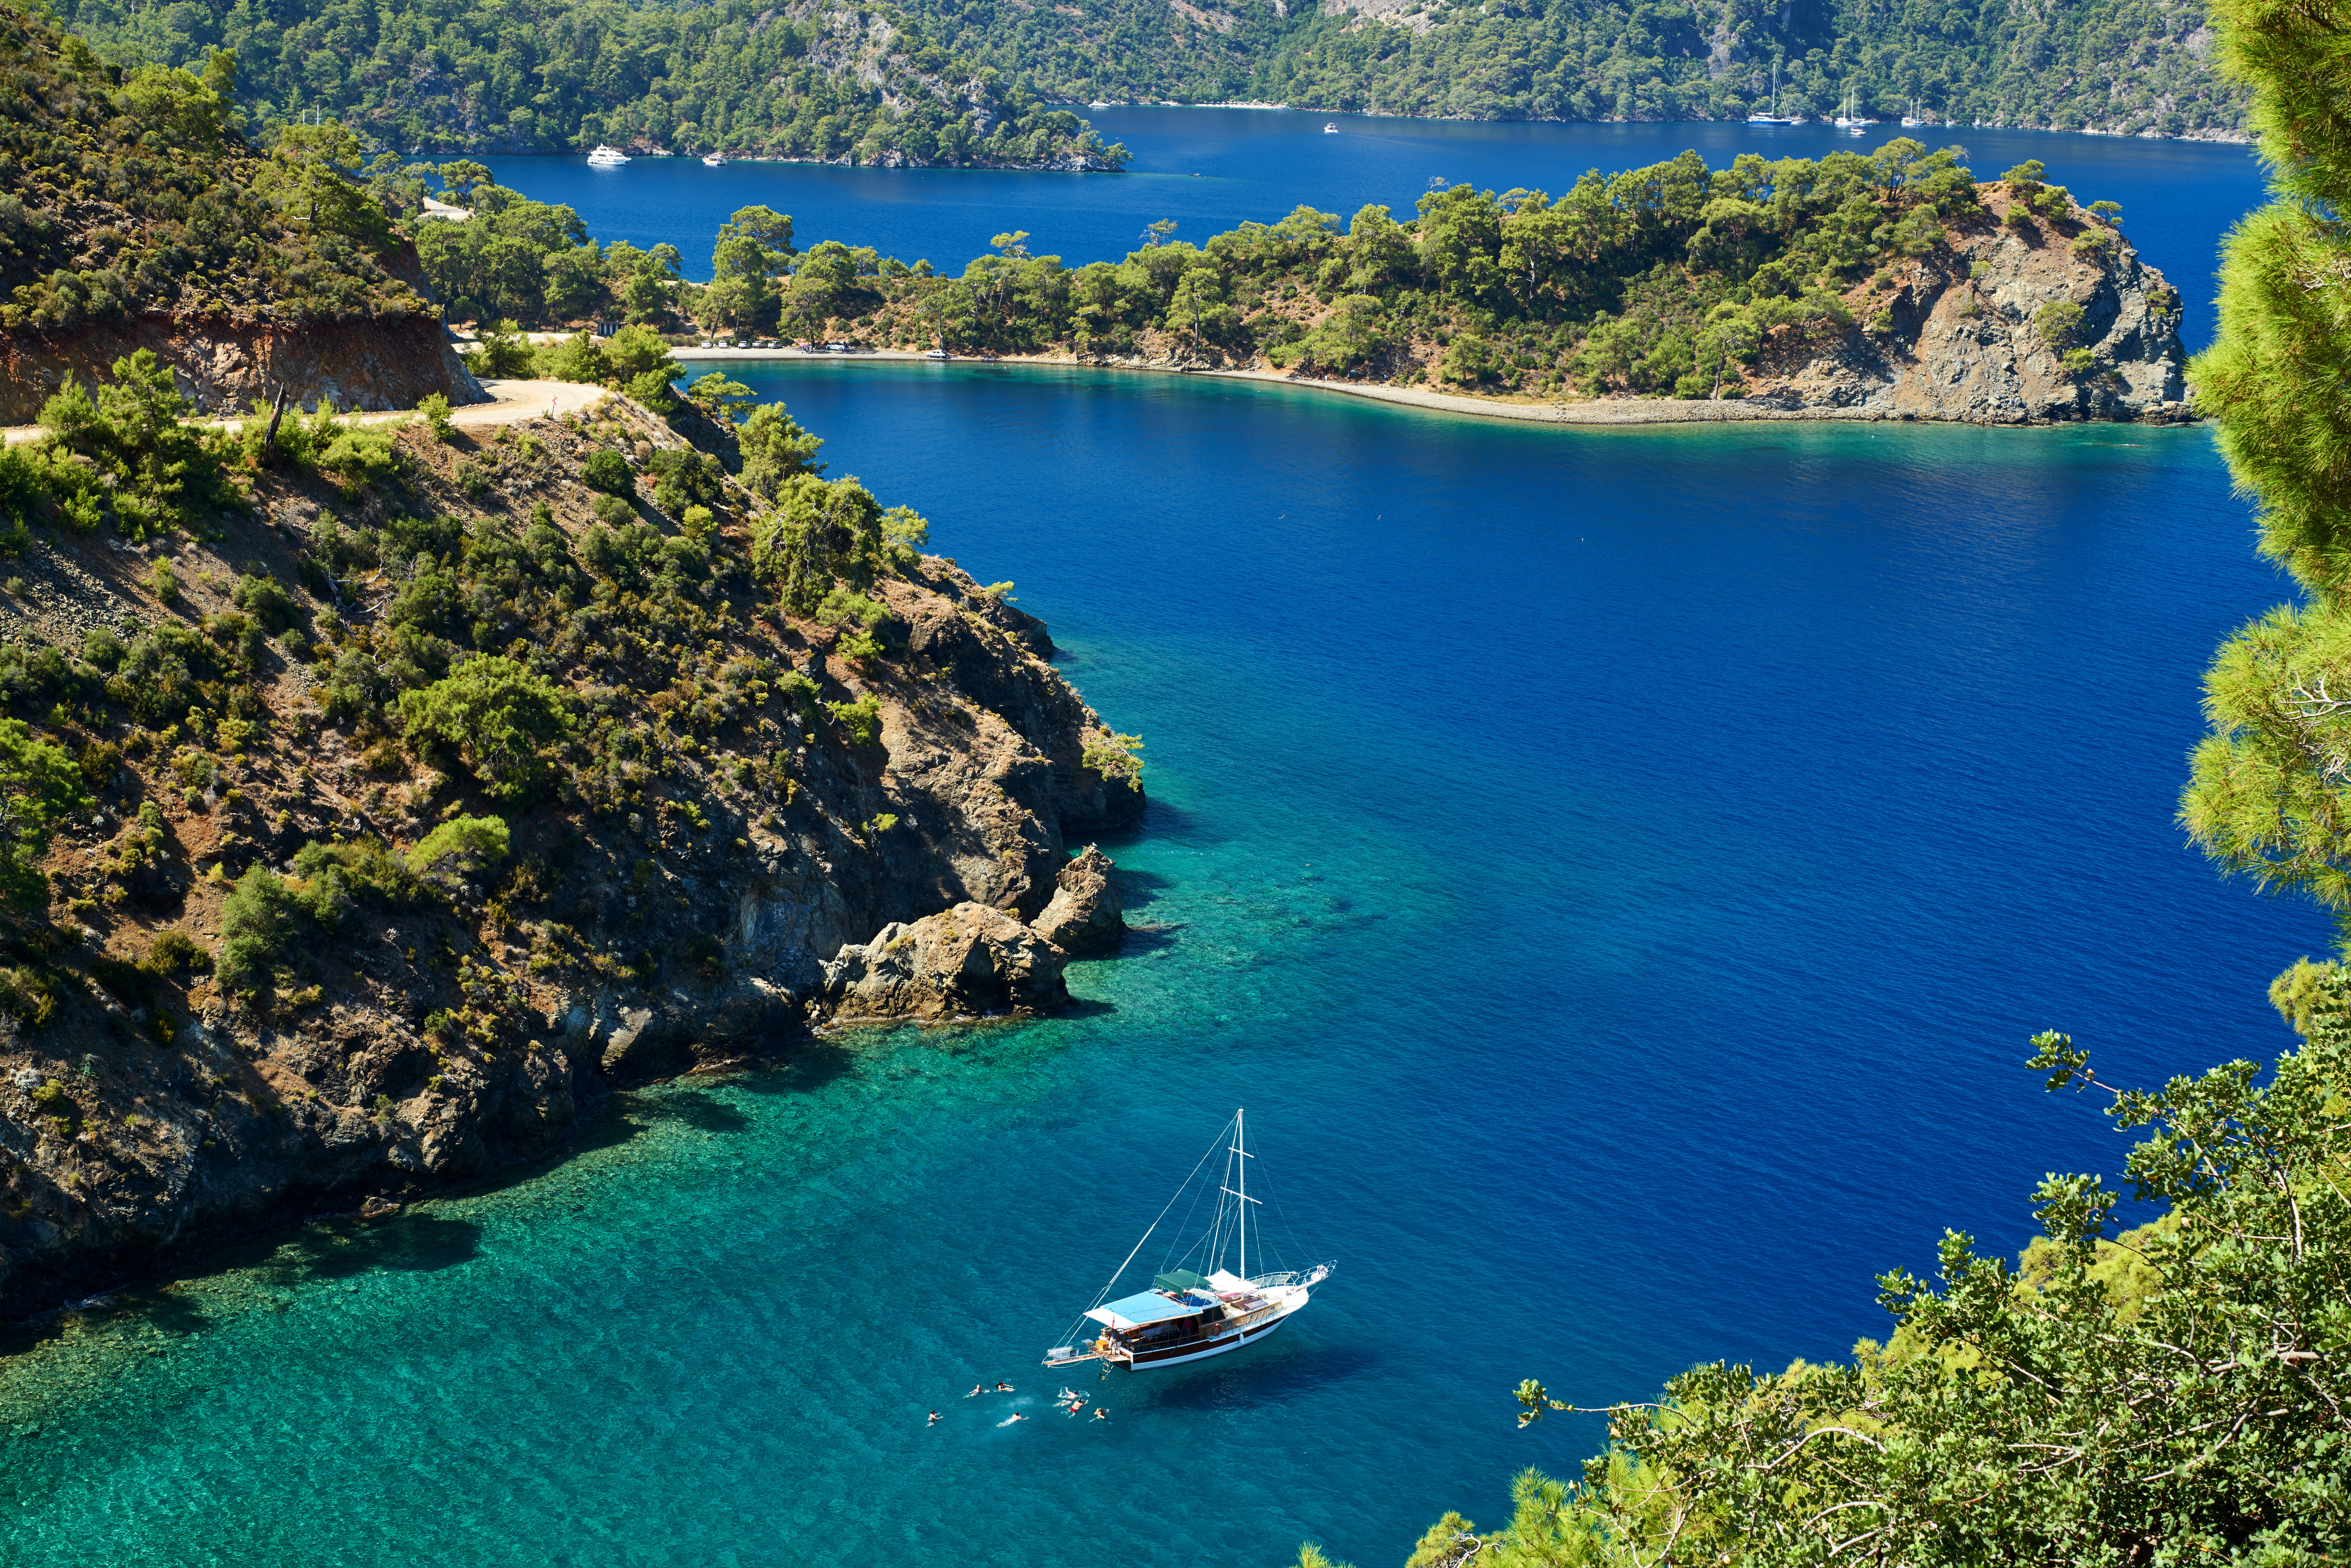 Sail boat in between lush green hills on blue waters in Turkey. 